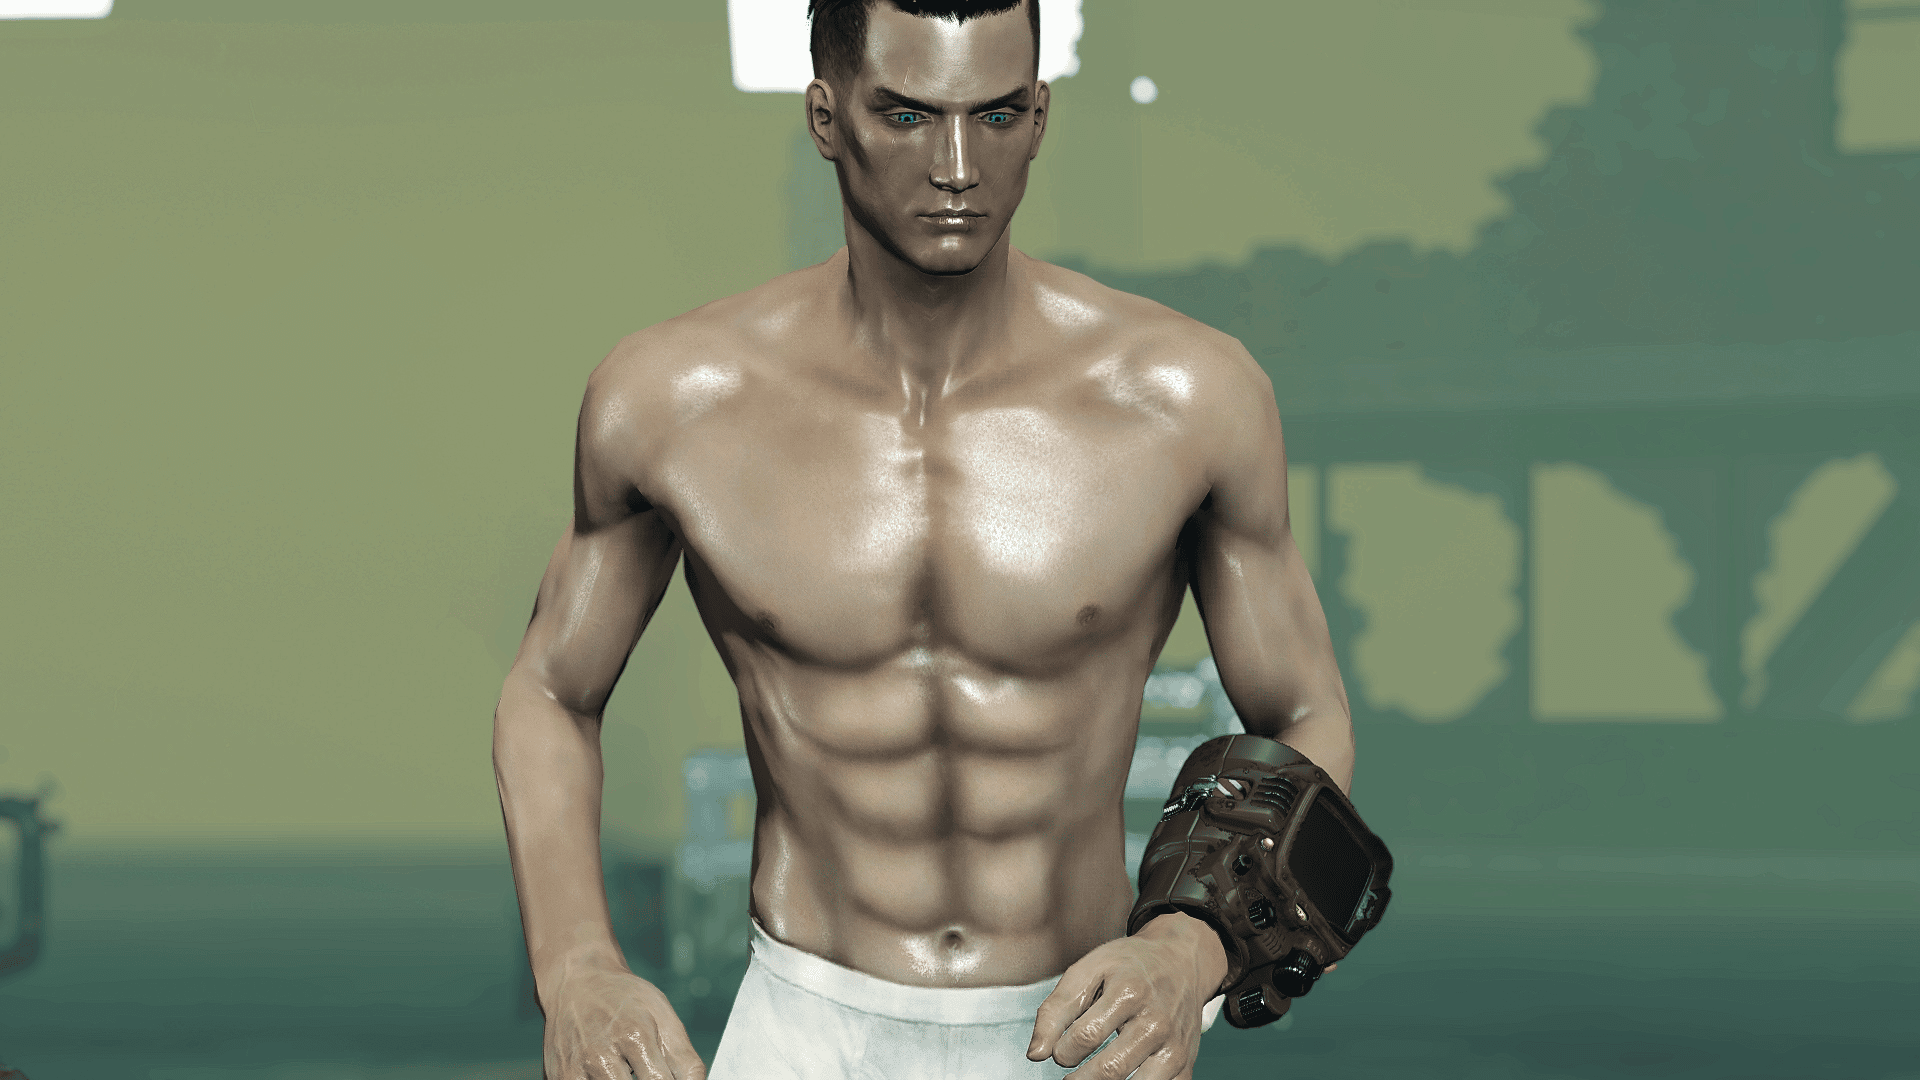 The Most Popular Fallout 4 Male Body Replacer Mods - TBM | TheBestMods